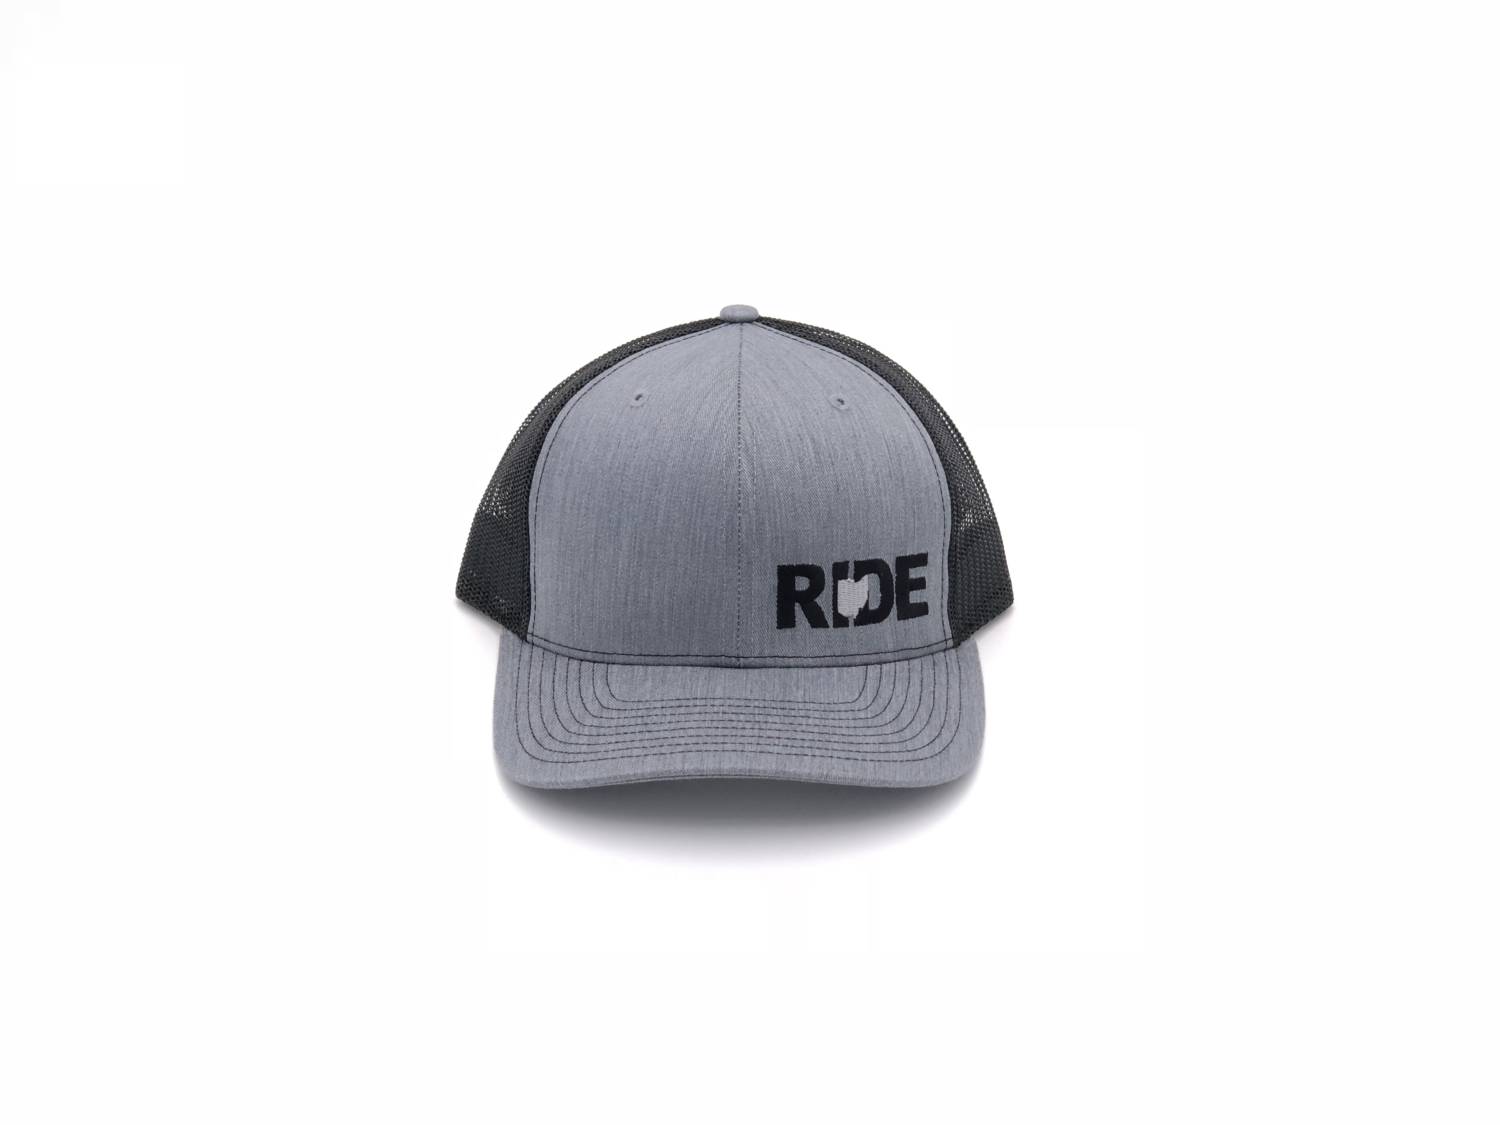 Ride Ohio Classic Pro Night Out Embroidered Snapback Trucker Hat Heather Gray/Black